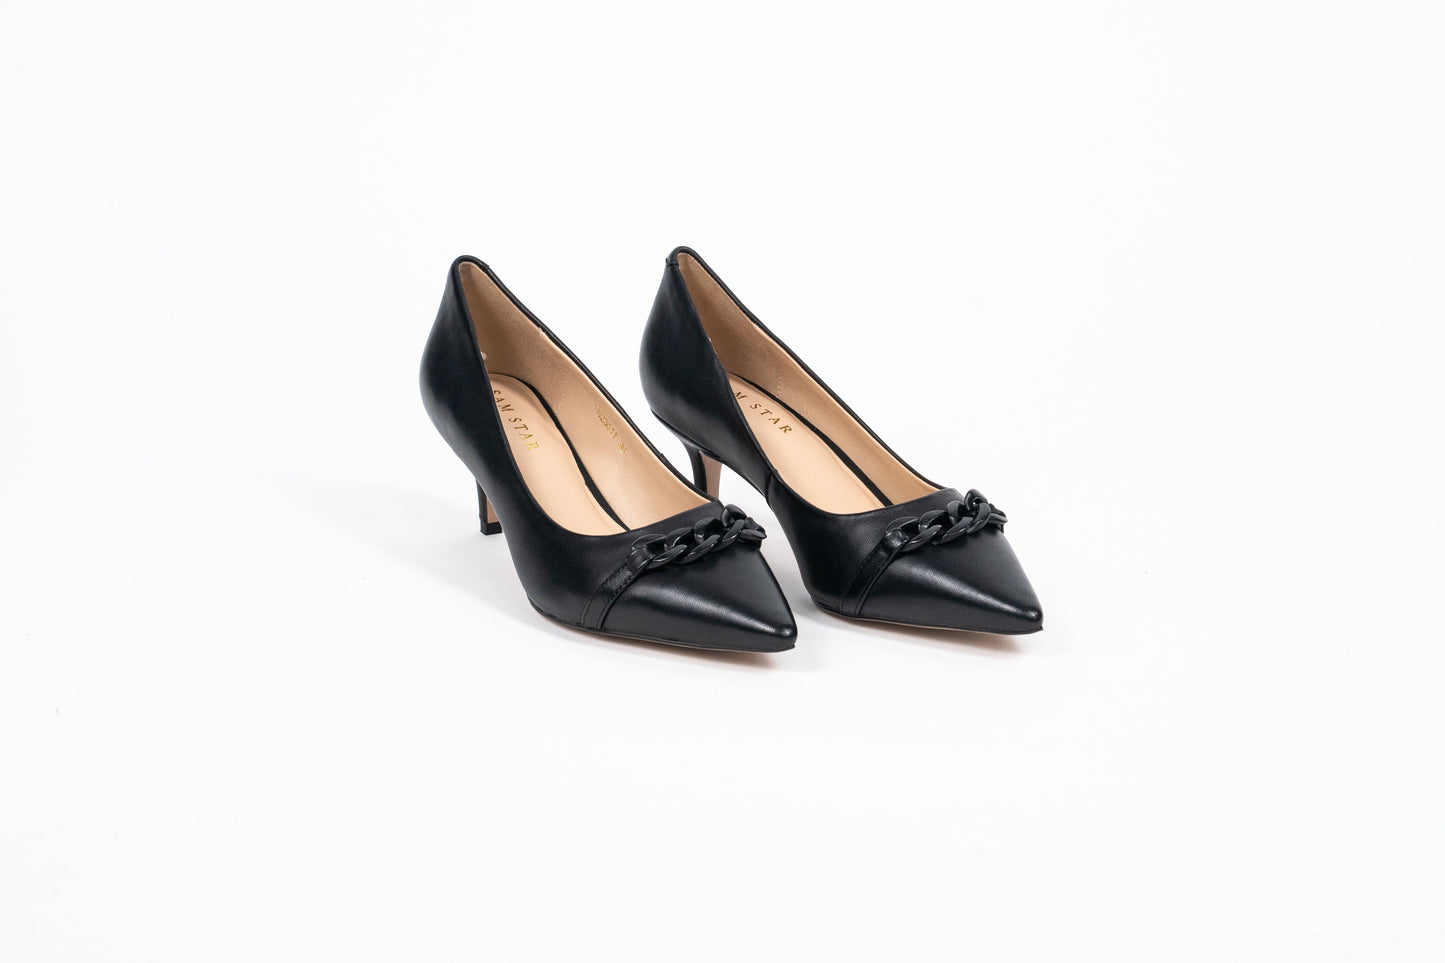 SS23011 Leather court shoes with chain detail - Black (New Arrival) ladies shoes Sam Star shoes Black 41/8 